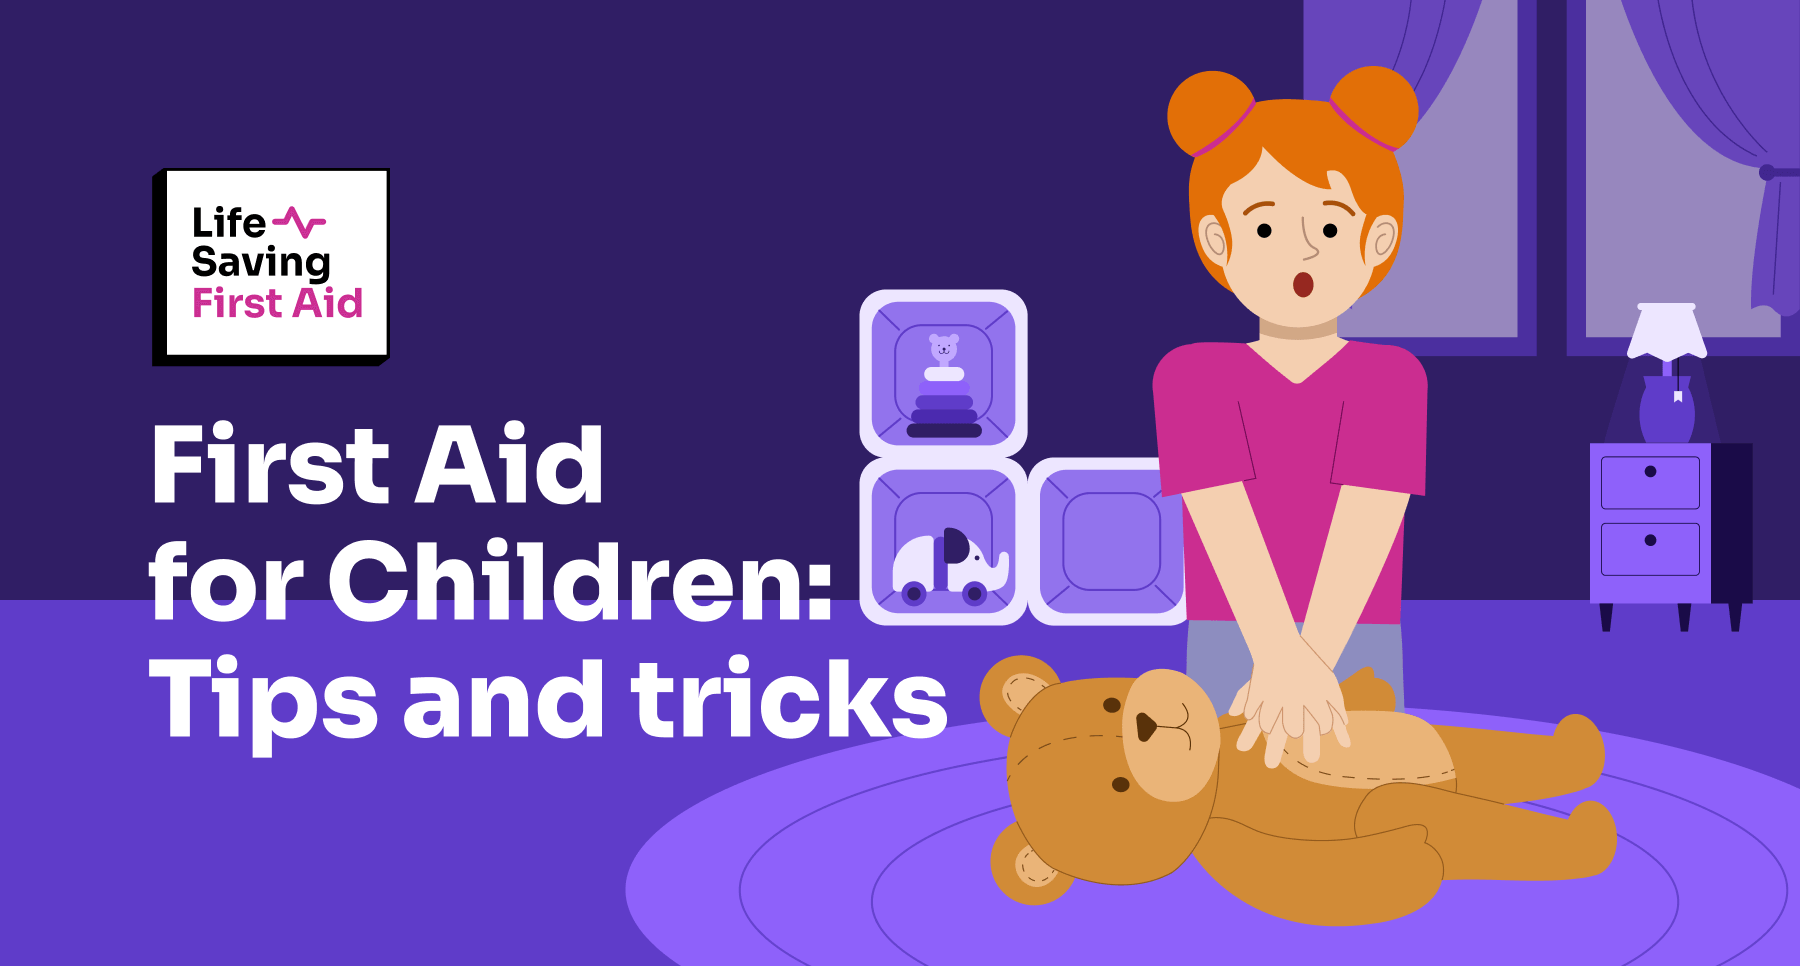 Image depicts text that says "First Aid for Children: Tips and Tricks" With an illustration of a child doing play first aid with a teddy bear in her room. Followed by a Life Saving First Aid Logo